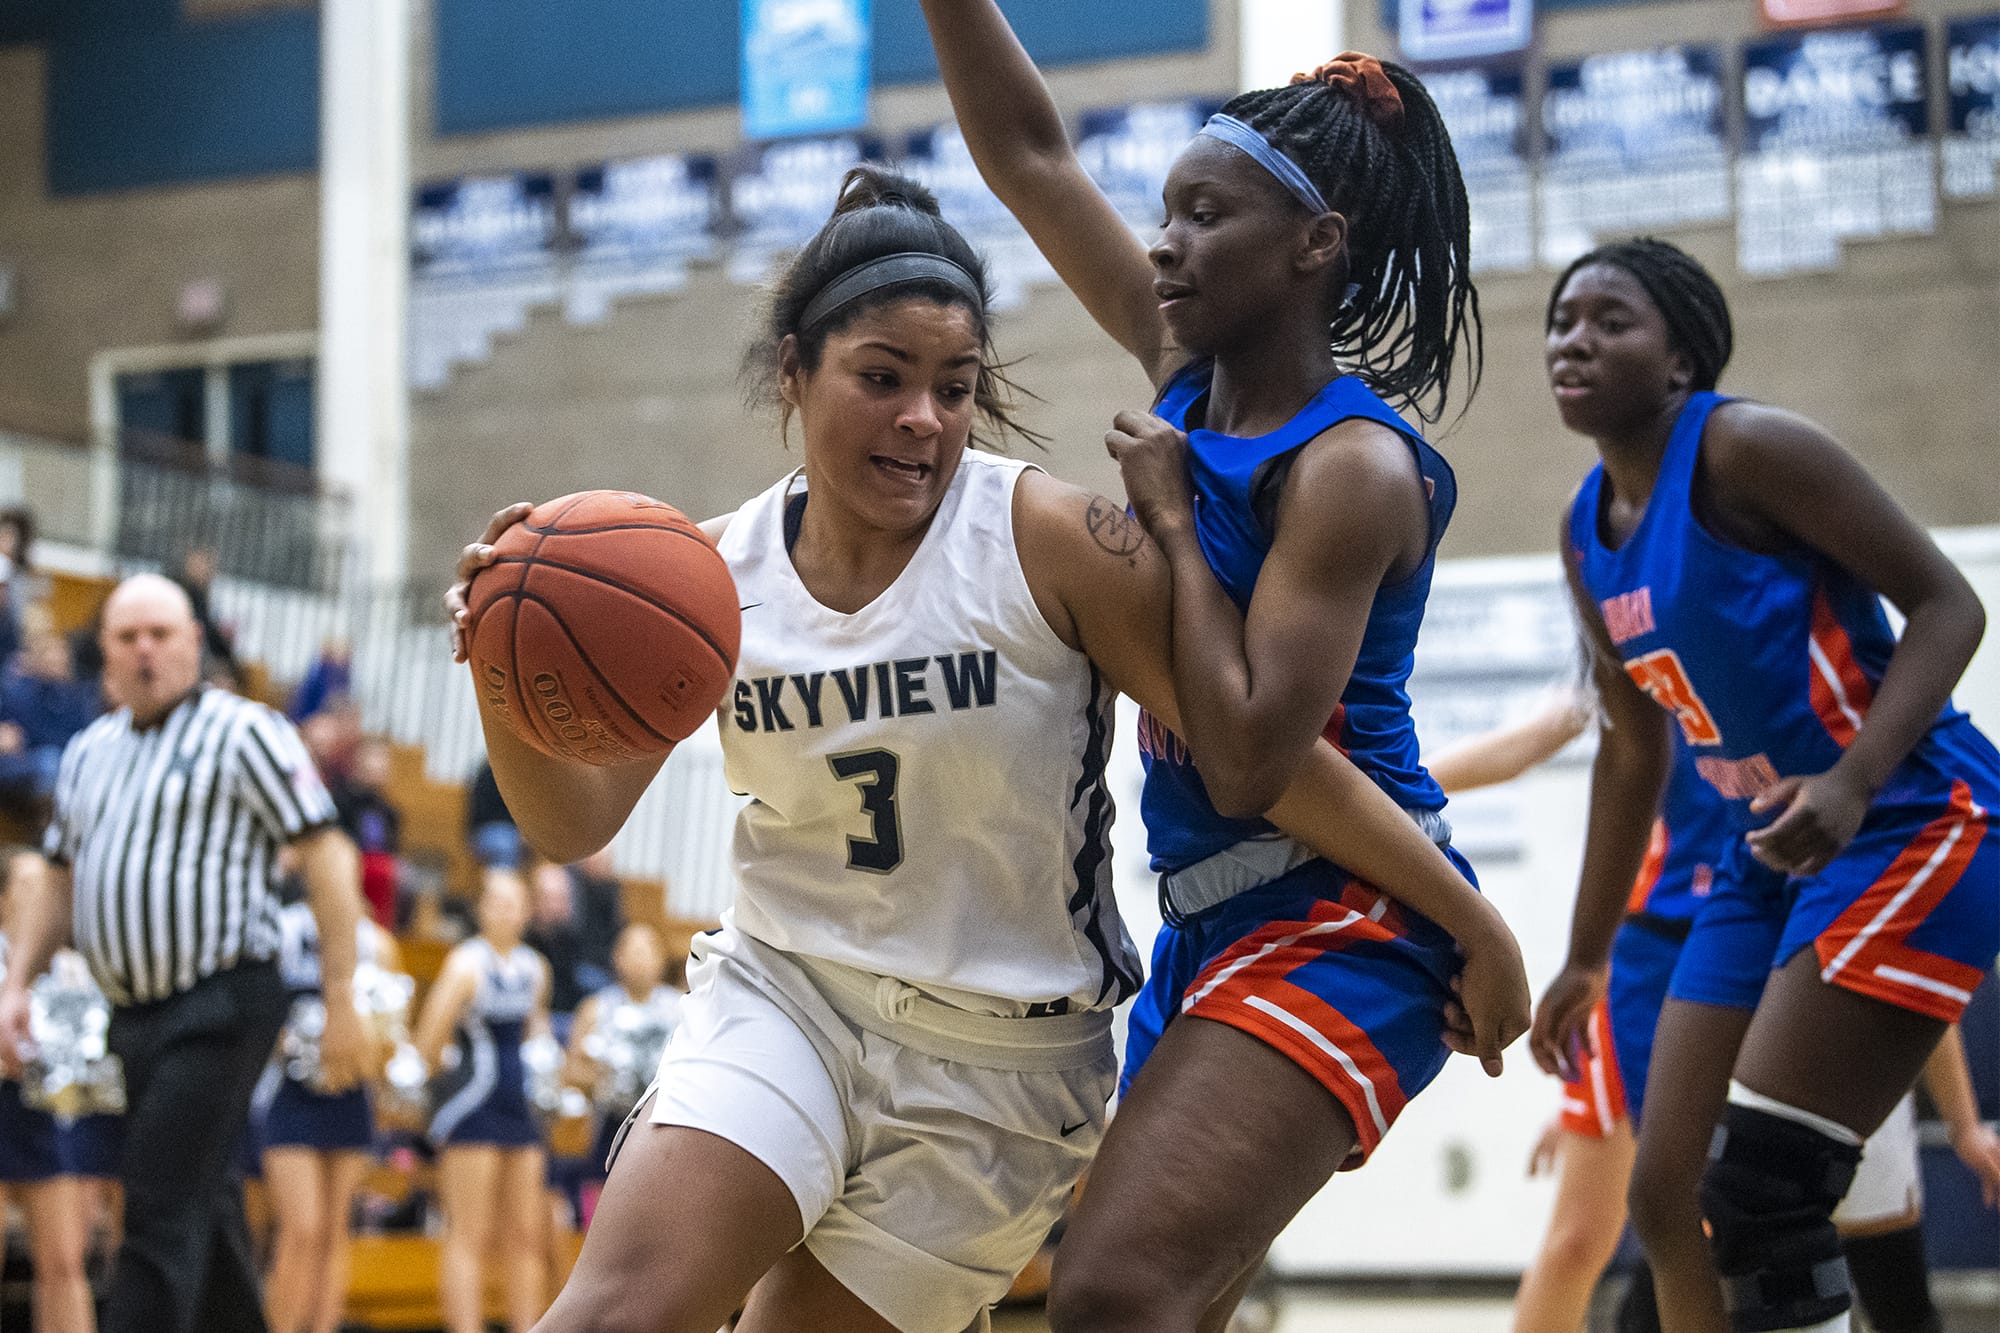 Skyview’s Mikelle Anthony drives to the hoop against Auburn during a game at Skyview High School on Thursday night, Feb. 13, 2020.